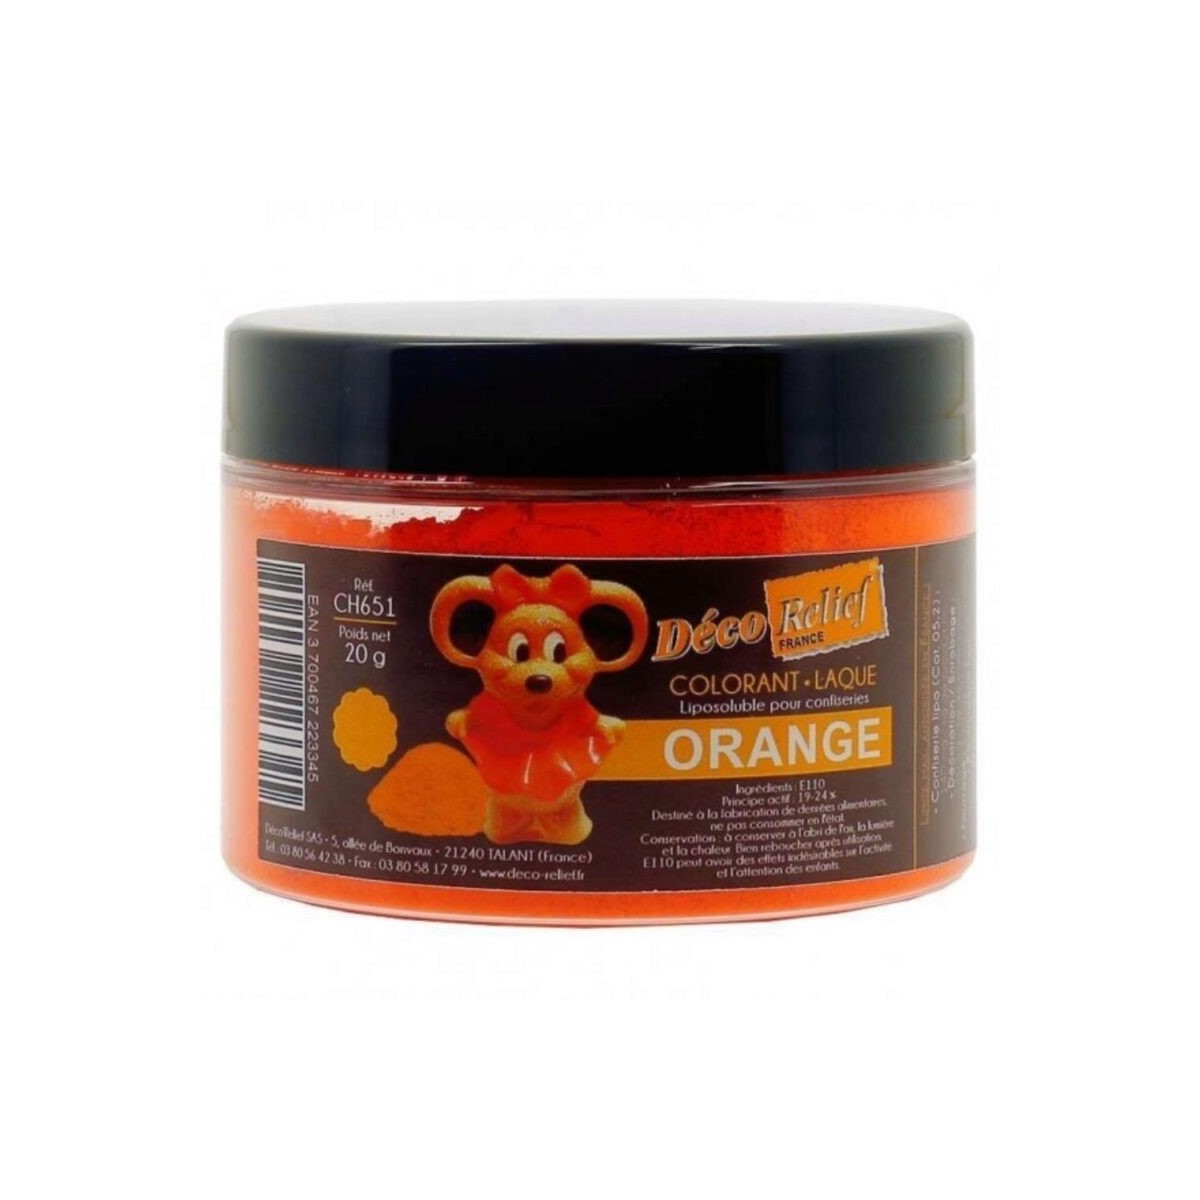 POWDERED COLORANT FOR CHOCOLATE ORANGE 20GR